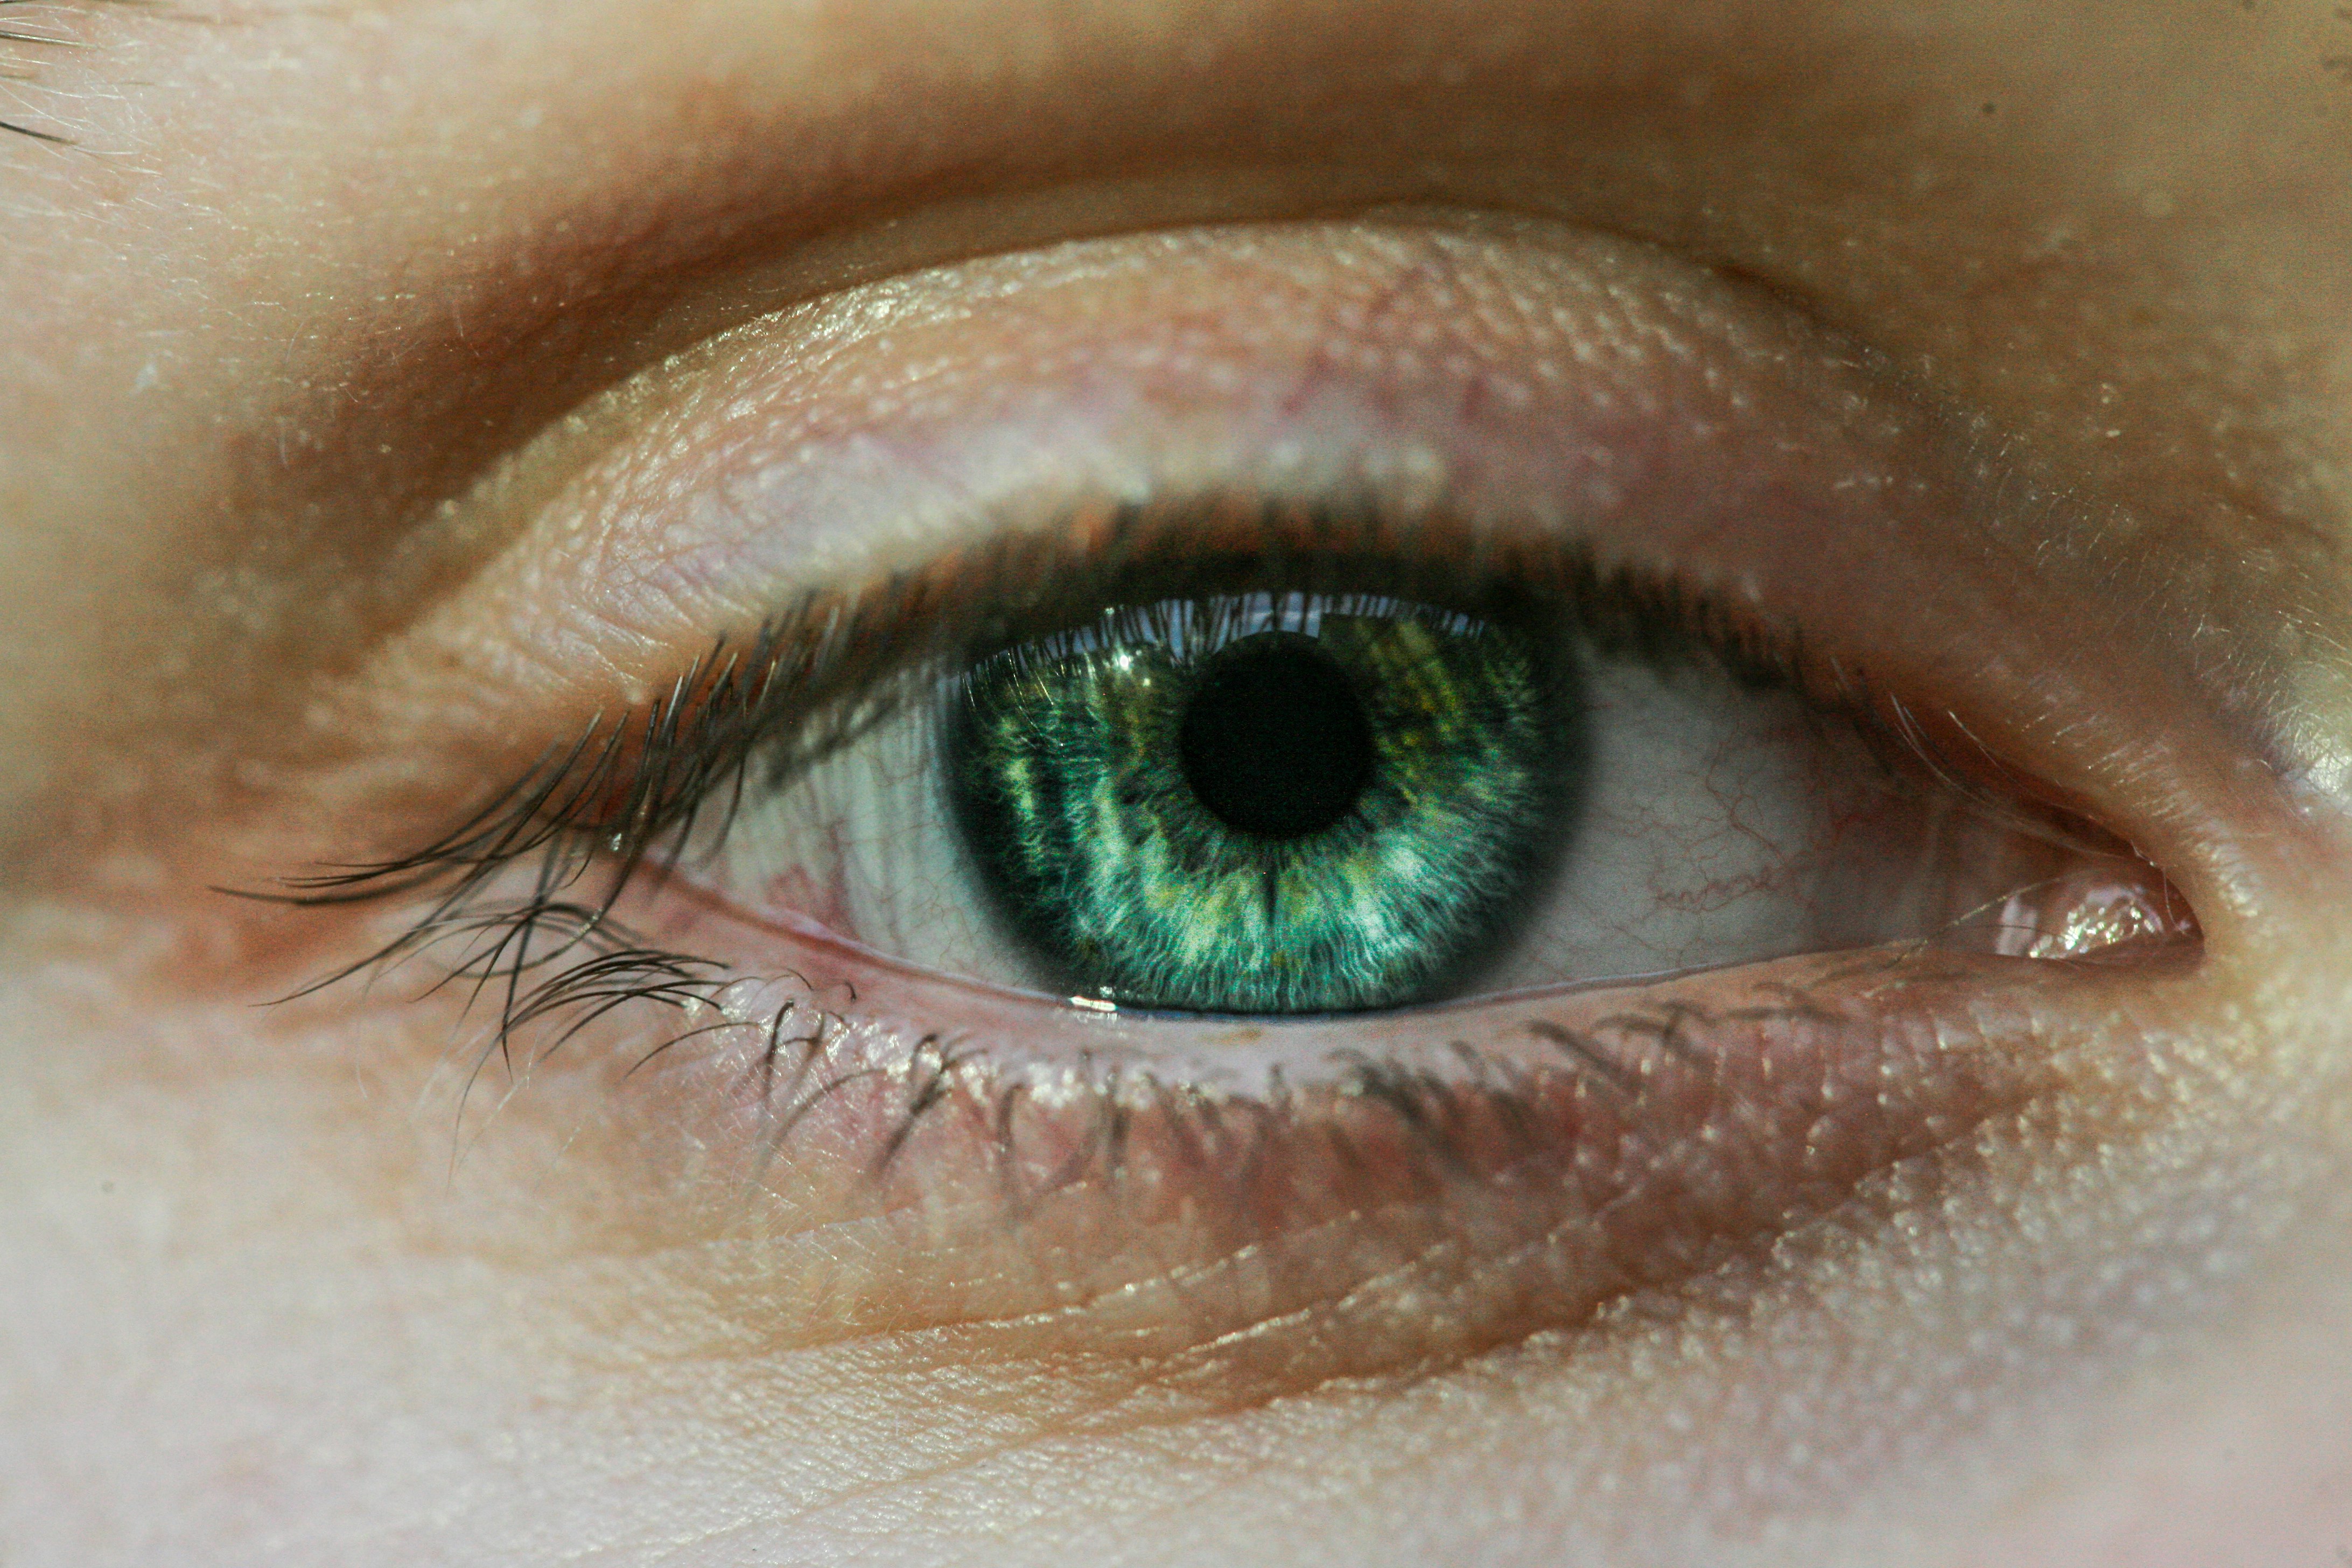 persons green eye in close up photography